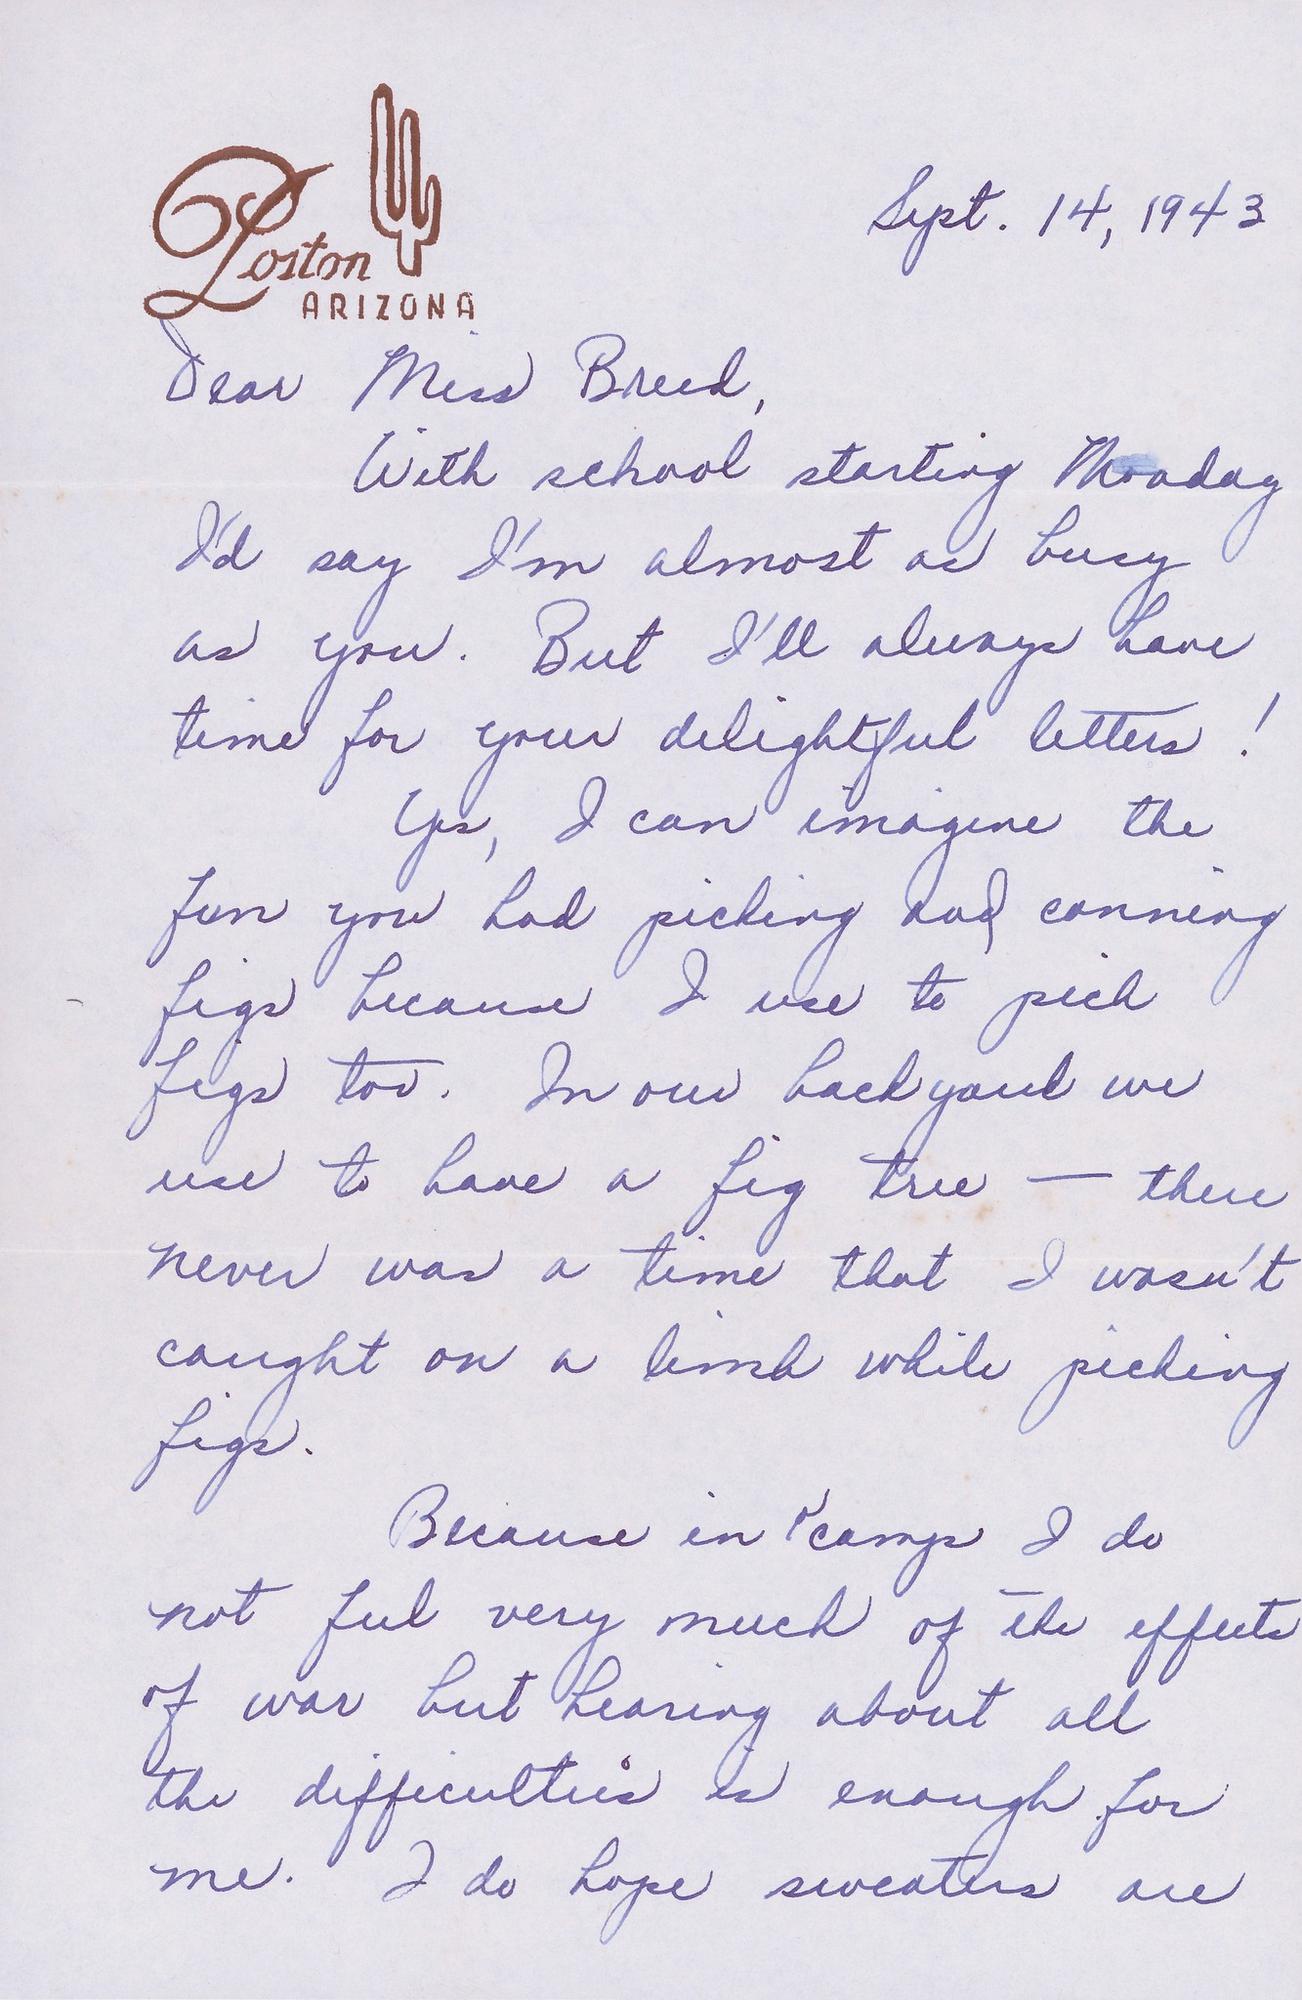 A 1943 letter from Louise Ogawa.